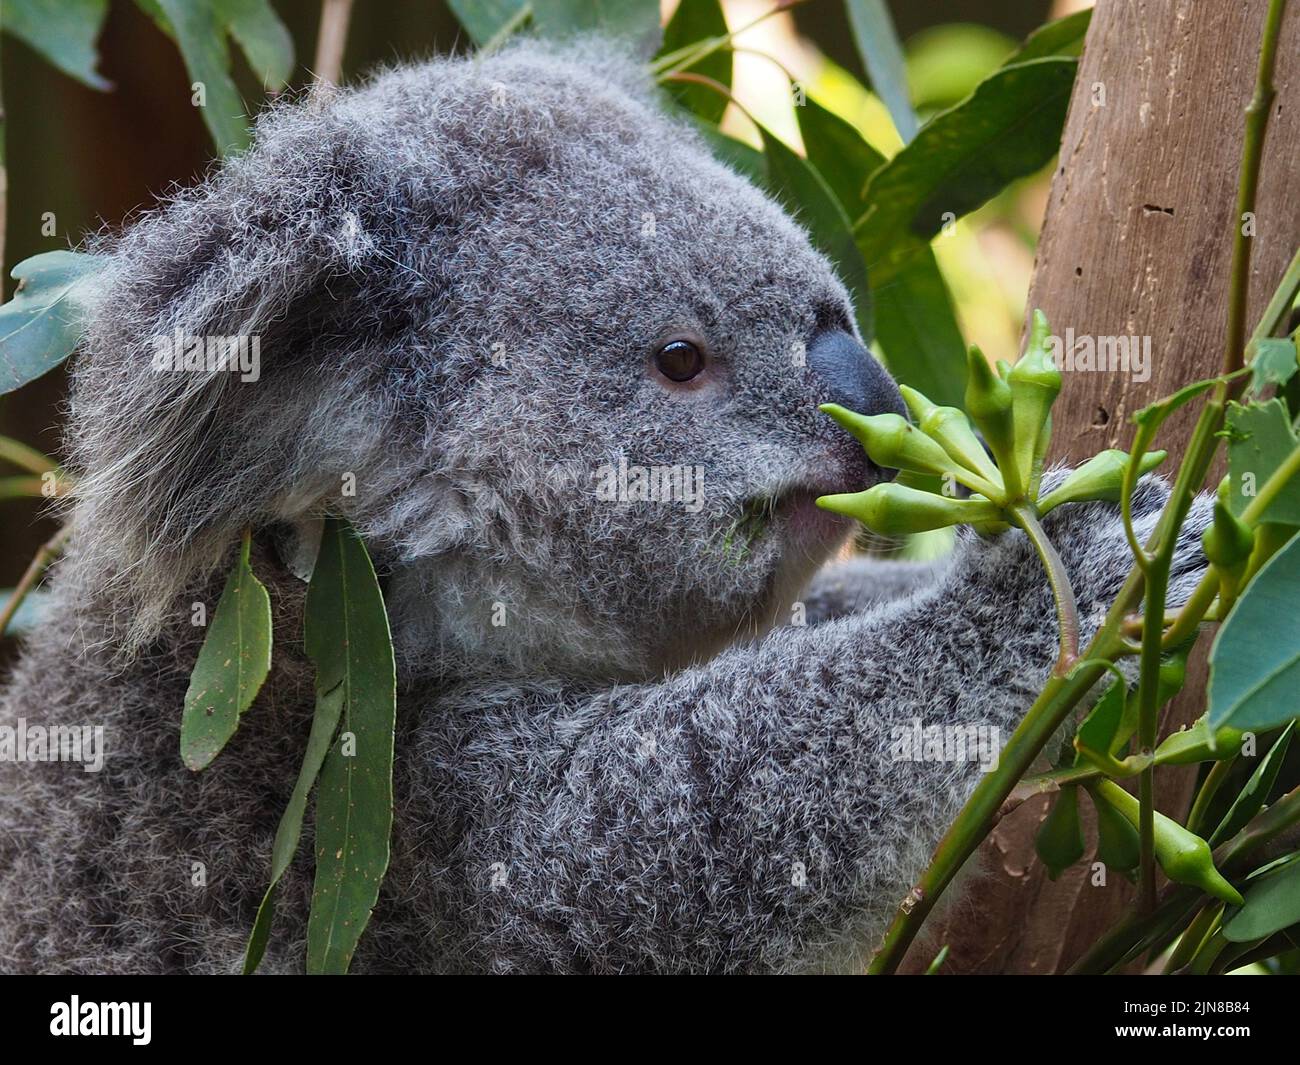 Charming pretty young Koala with bright eyes and soft downy fur. Stock Photo